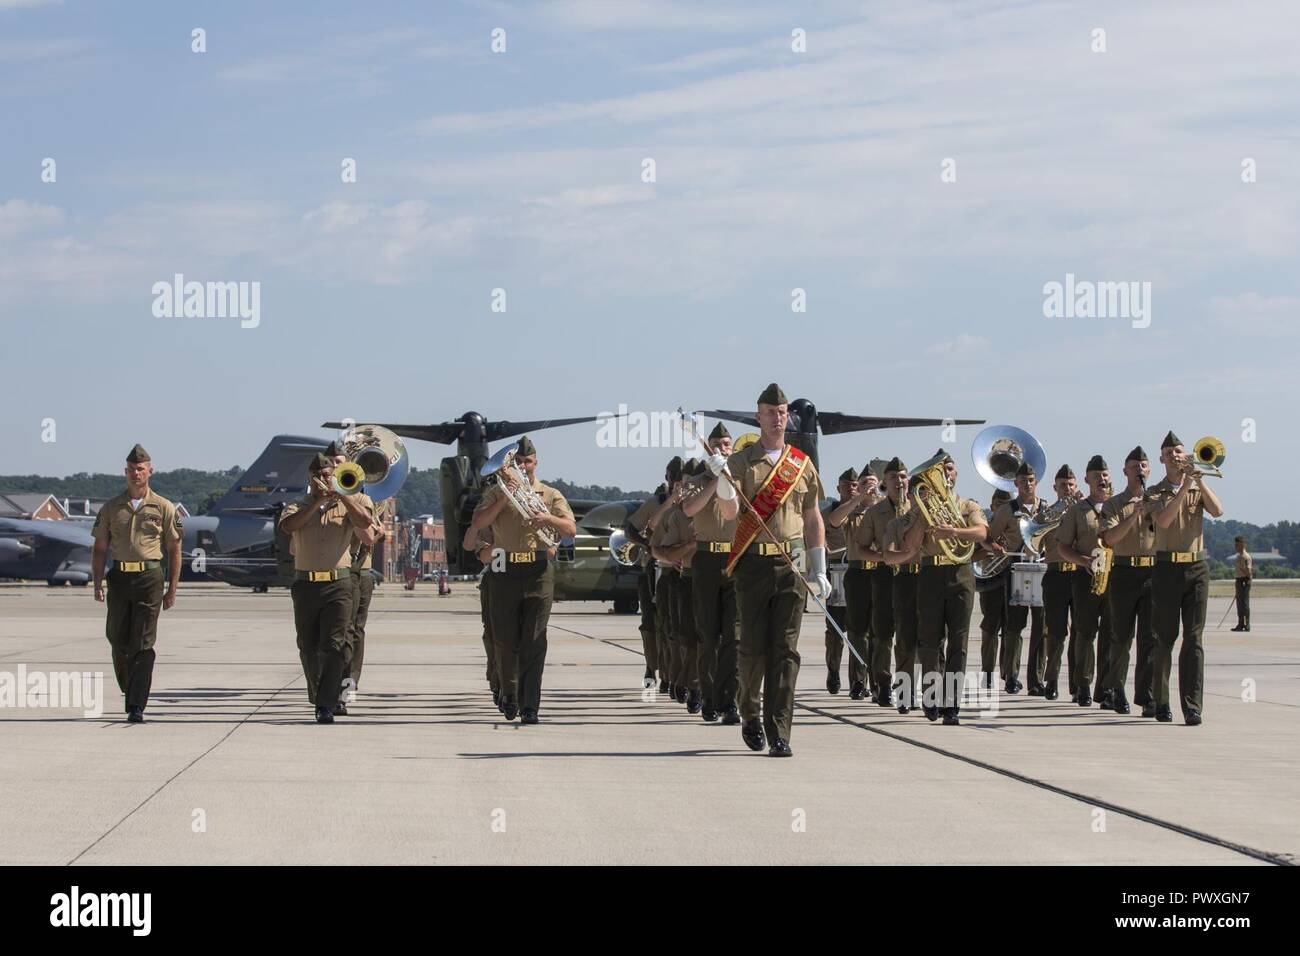 The Quantico Marine Band performs during a change of command ceremony for Helicopter Squadron One (HMX-1) at Marine Corps Base Quantico, Va., June 30, 2017. The ceremony was held to signify the transition of HMX-1 command from U.S. Marine Corps Col. Brian E. Bufton to Col. Garrett R. Hoffman. Stock Photo